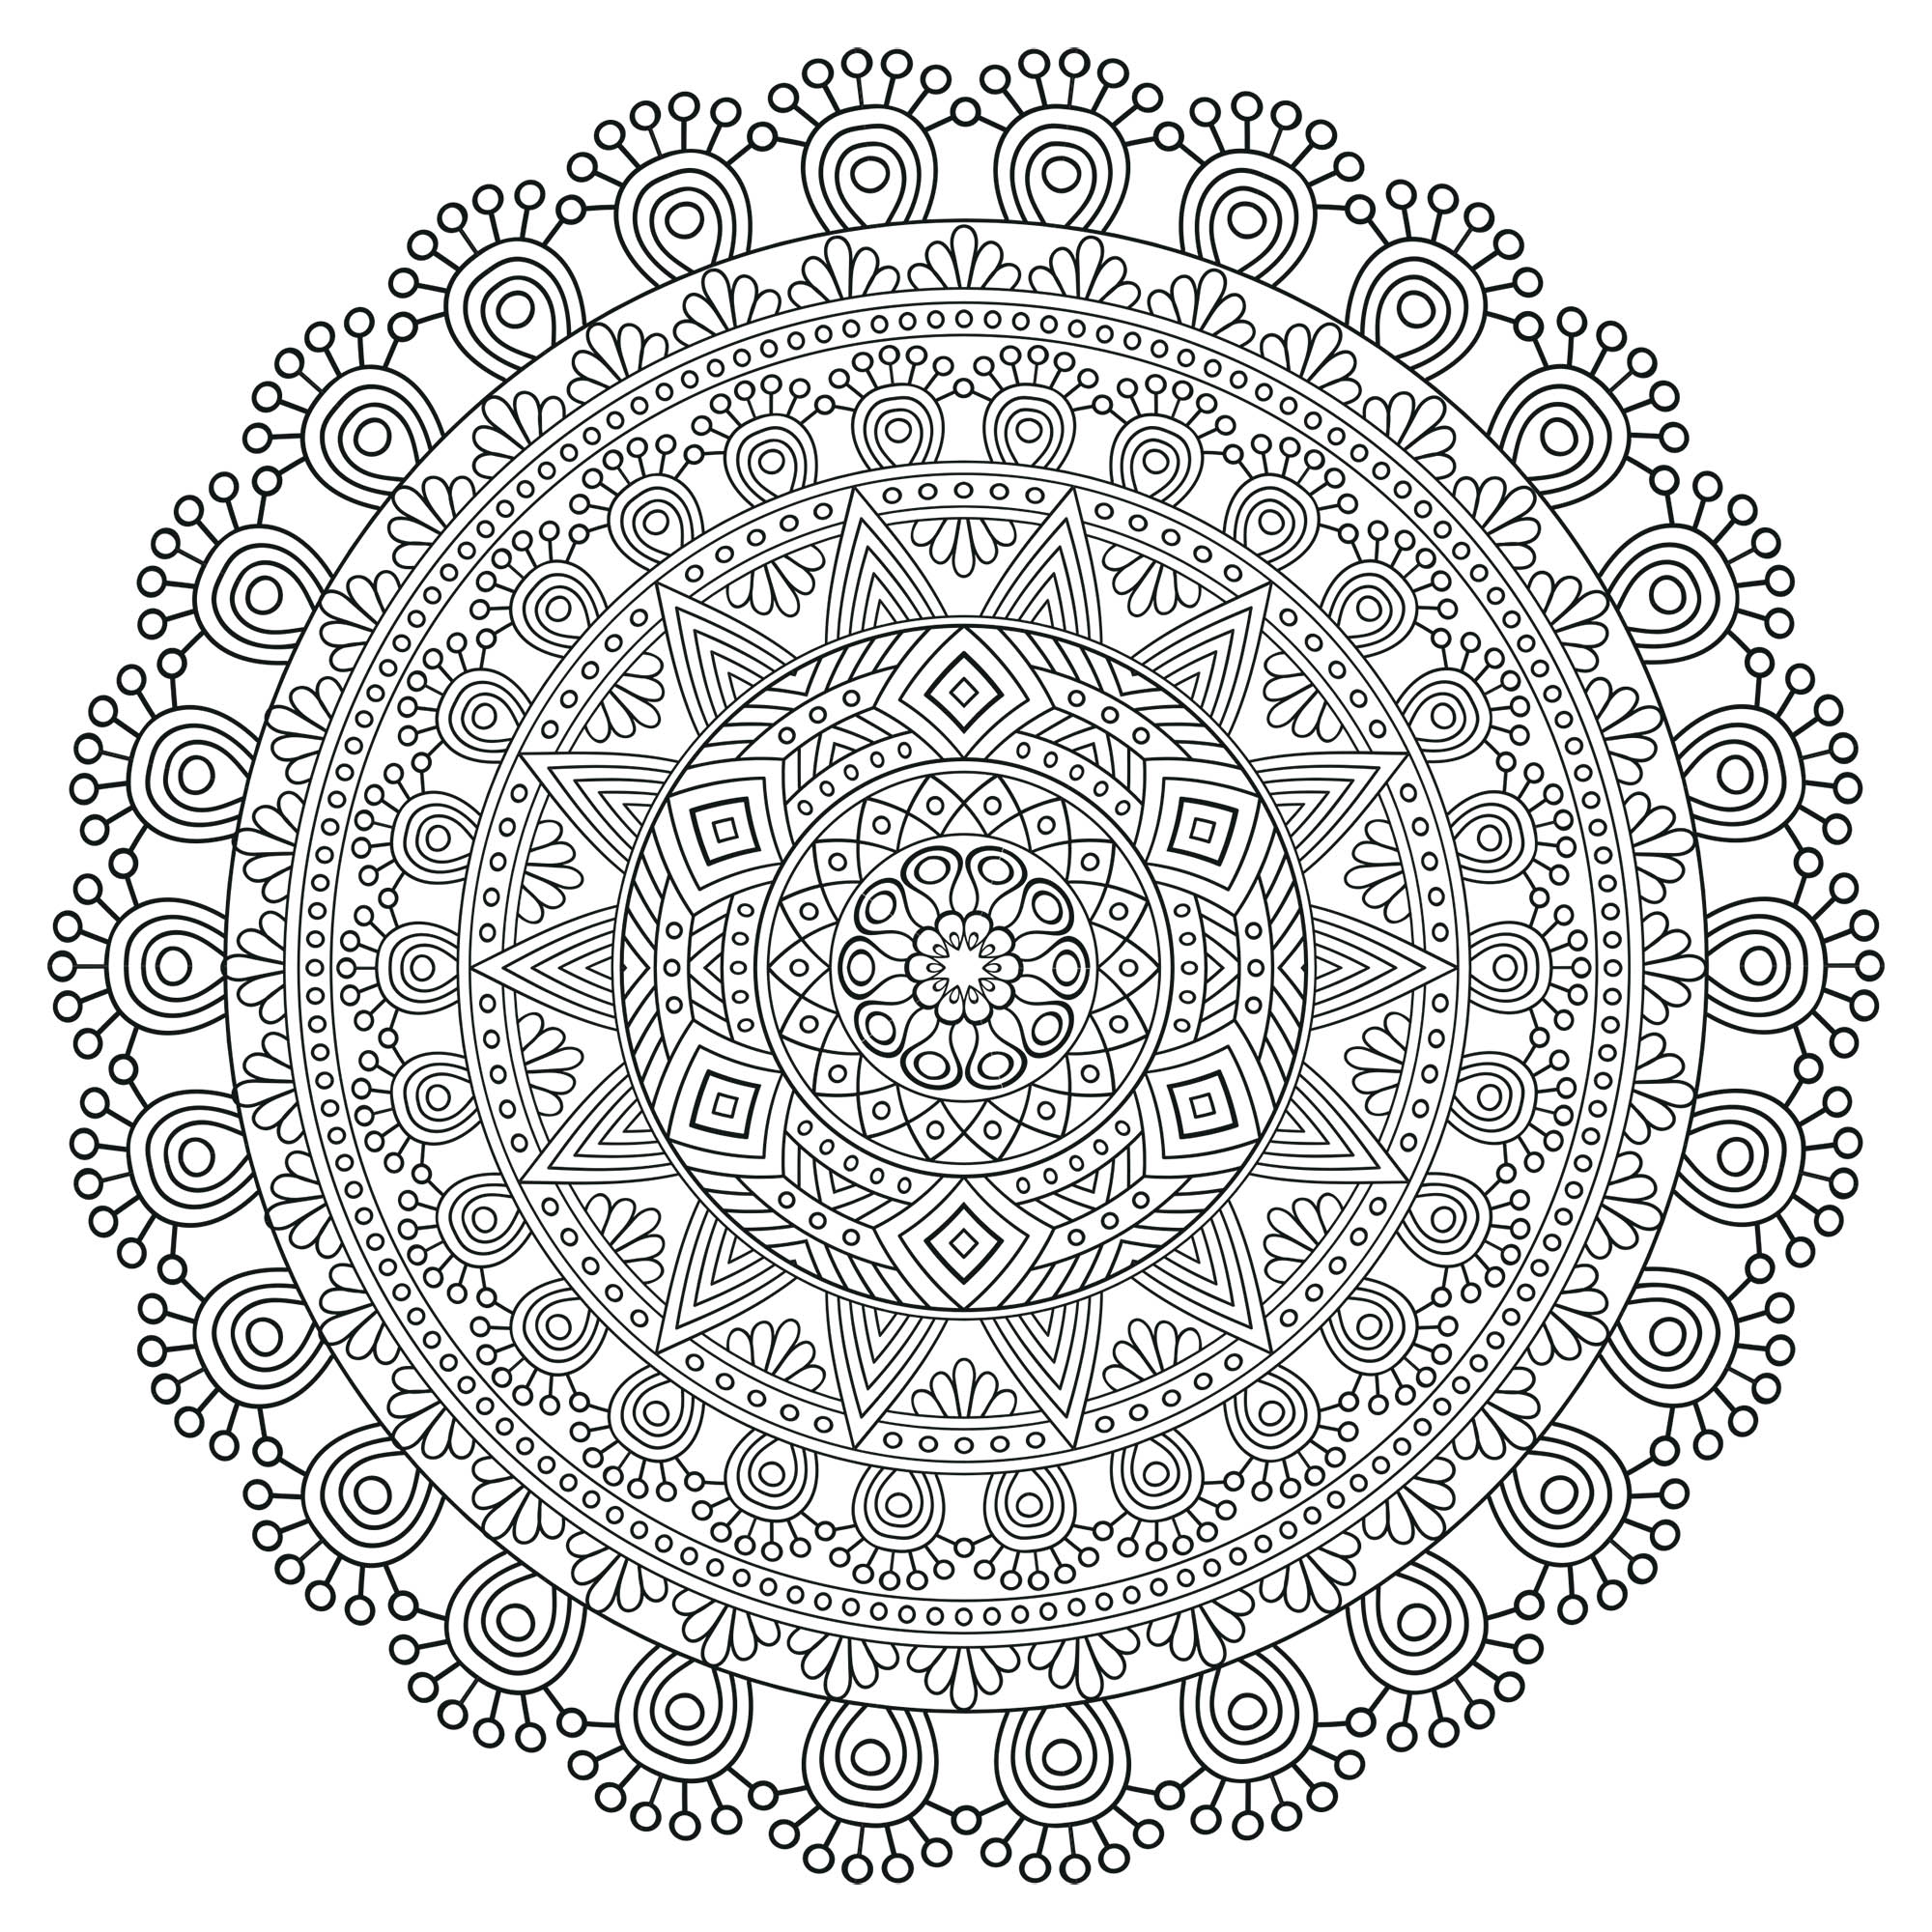 When coloring can really relax you ... This is the case with this Mandala coloring page of high quality. It can sometimes be even more relaxing when coloring and passively listening to music : don't hesitate to do it !